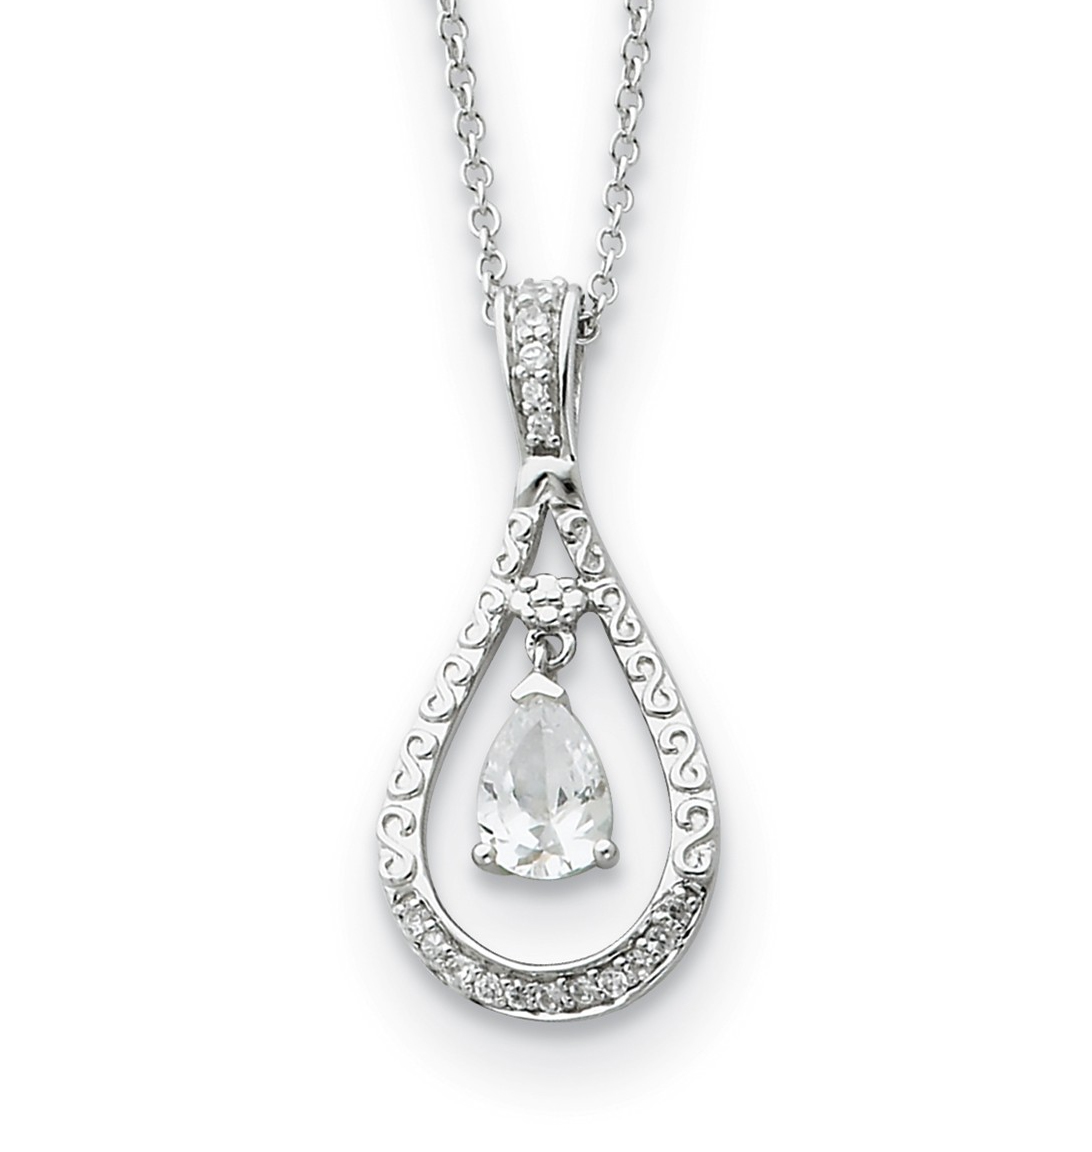 Antiqued April CZ Birthstone 'Never Forget Tear' Pendant Necklace, Rhodium-Plated Sterling Silver.